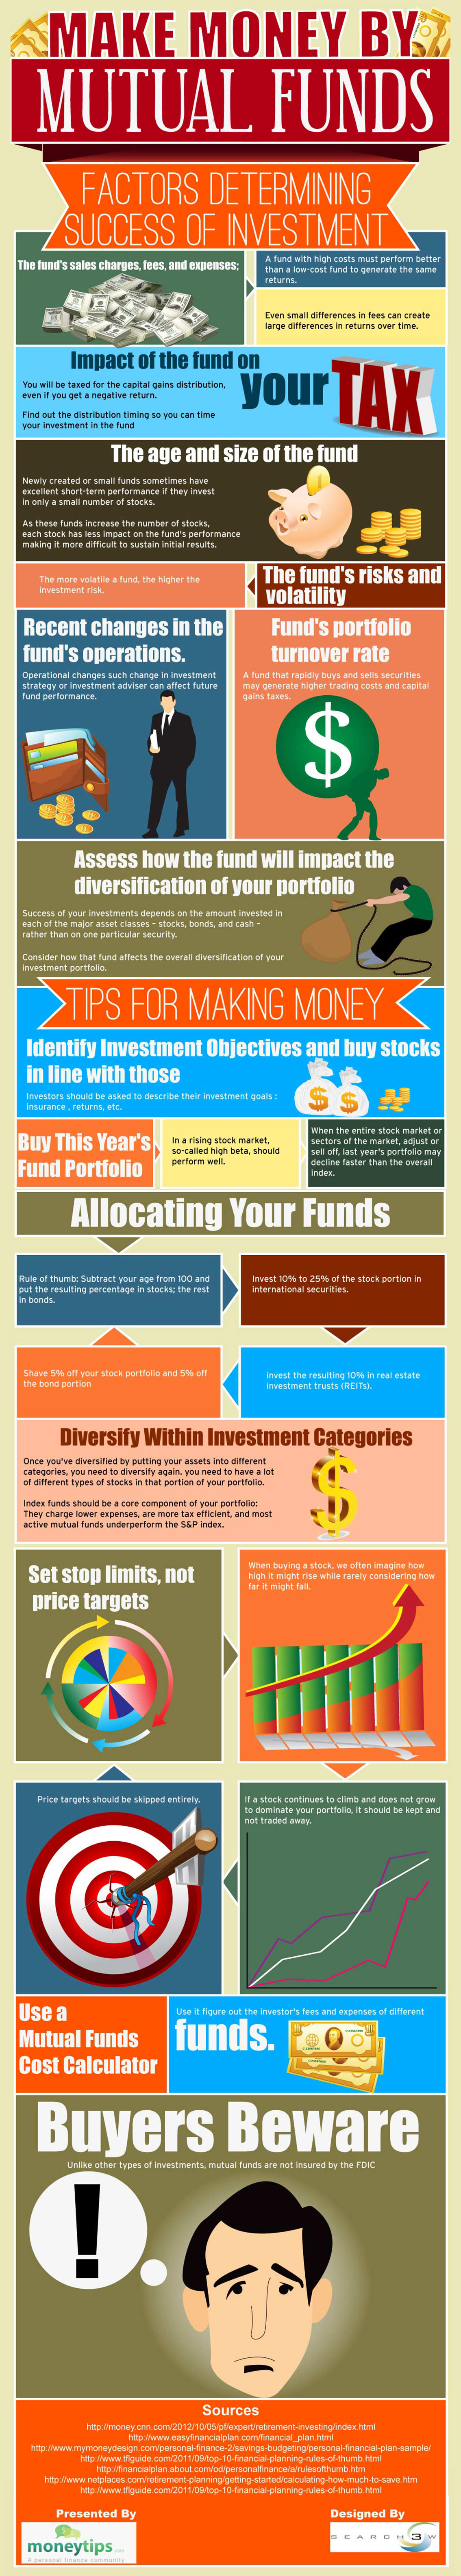 How to Make Money with Mutual Funds Infographic